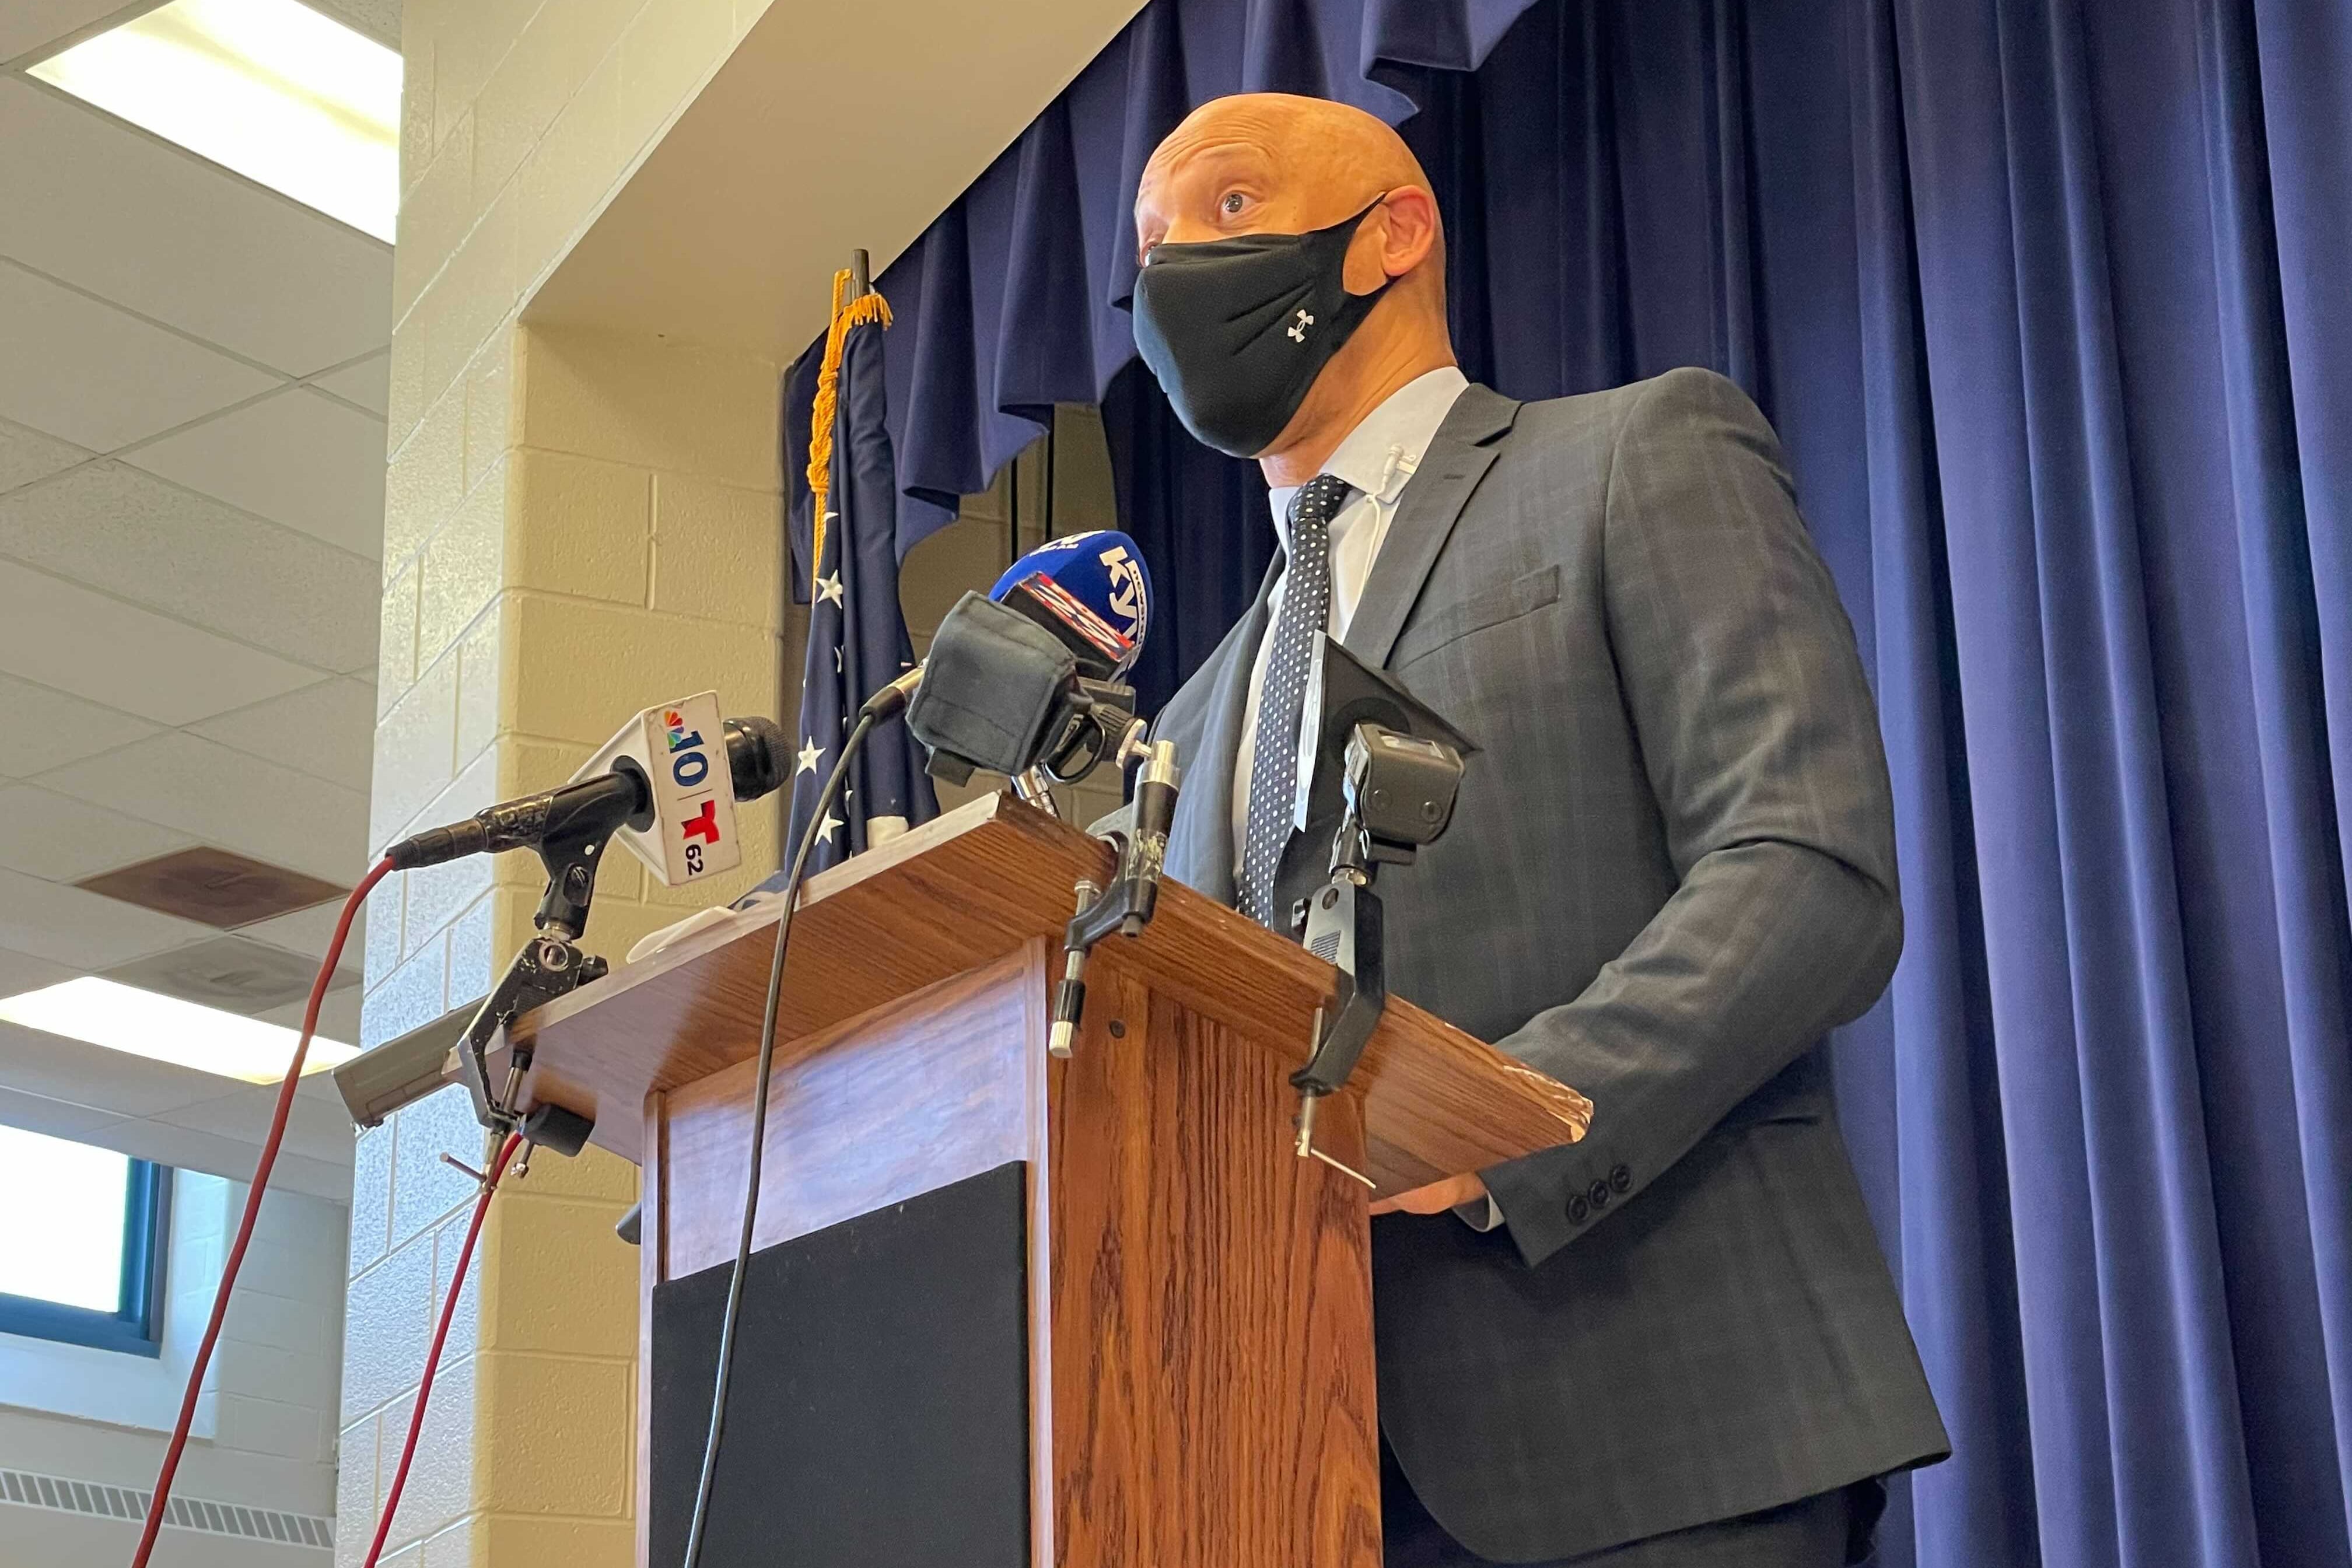 William Hite wearing a face mask standing at a podium with microphones.